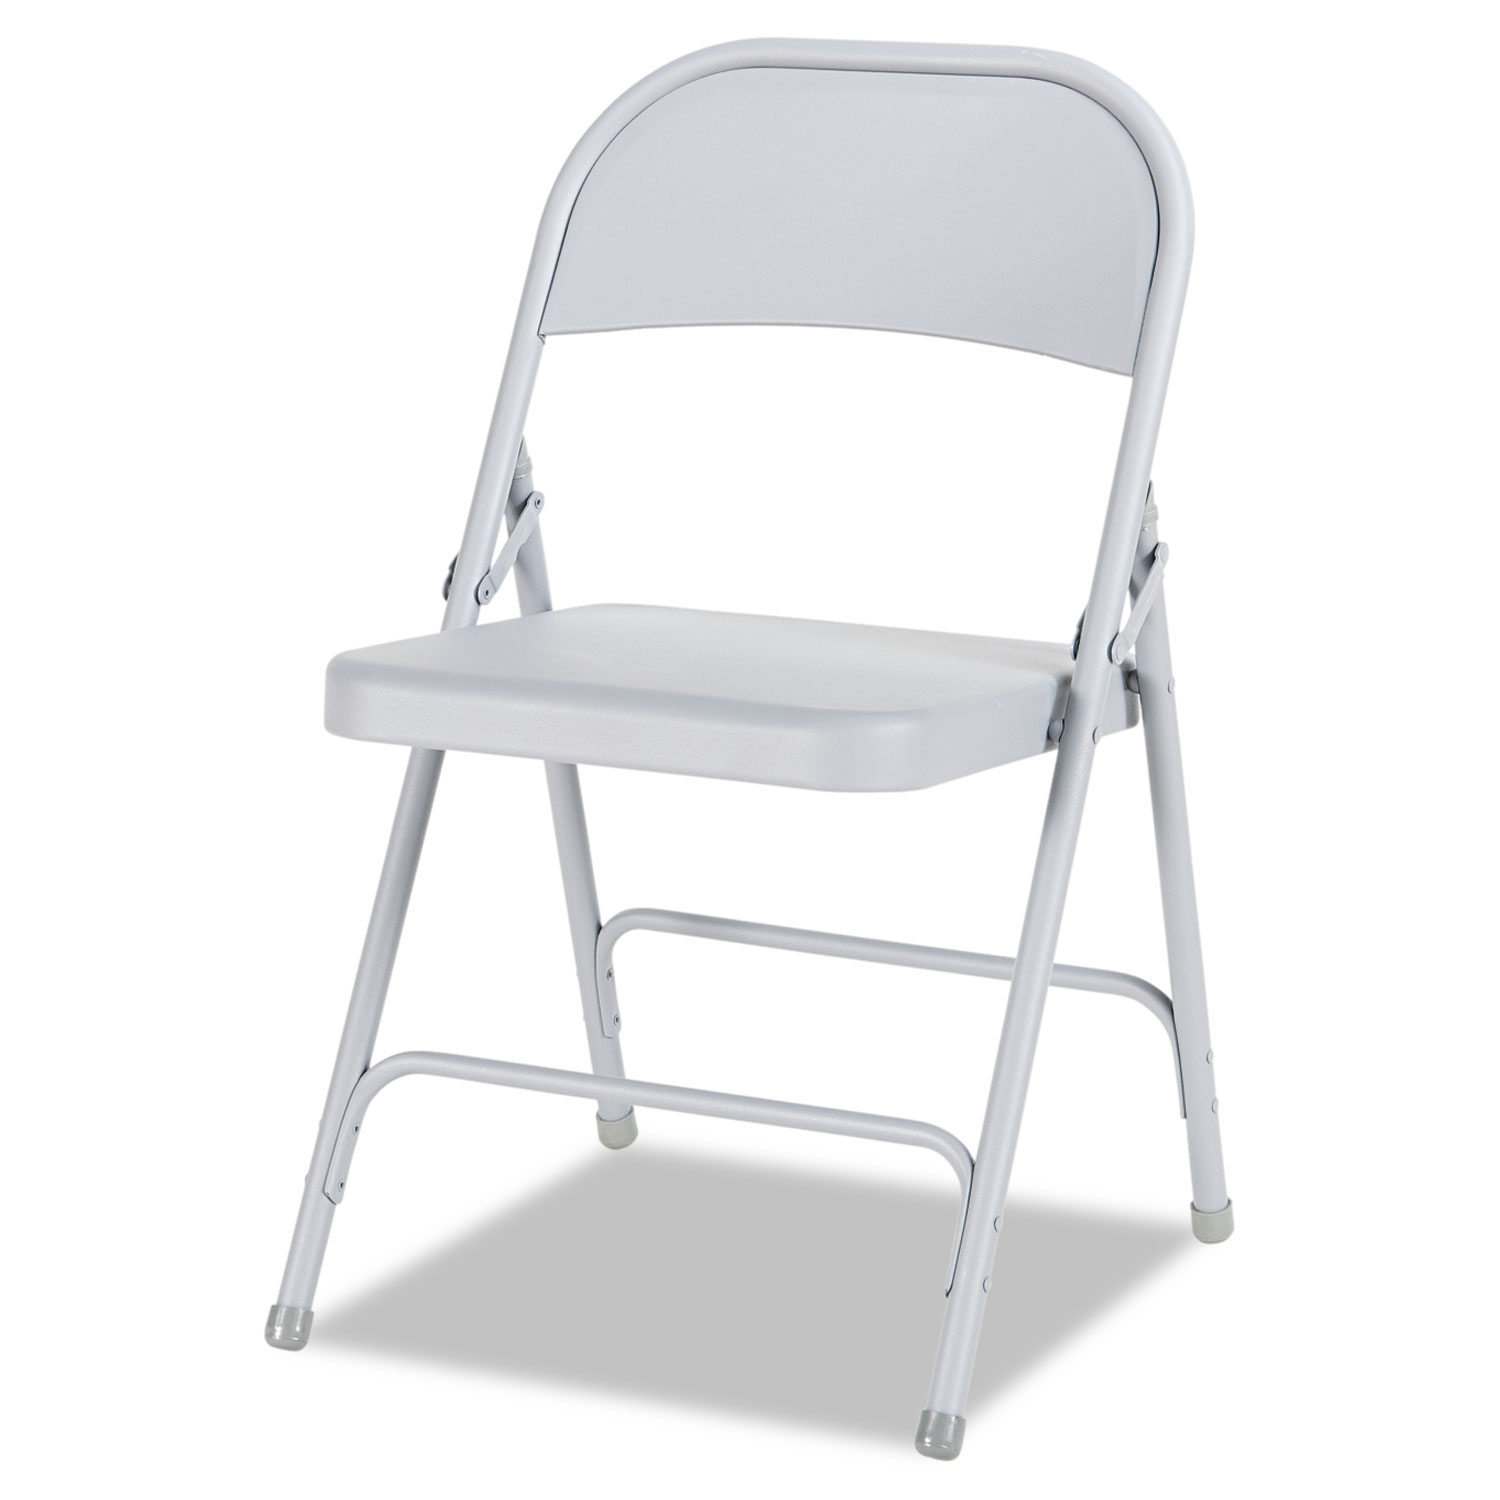 Steel Folding Chair with Two-Brace Support, Light Gray, 4/Carton